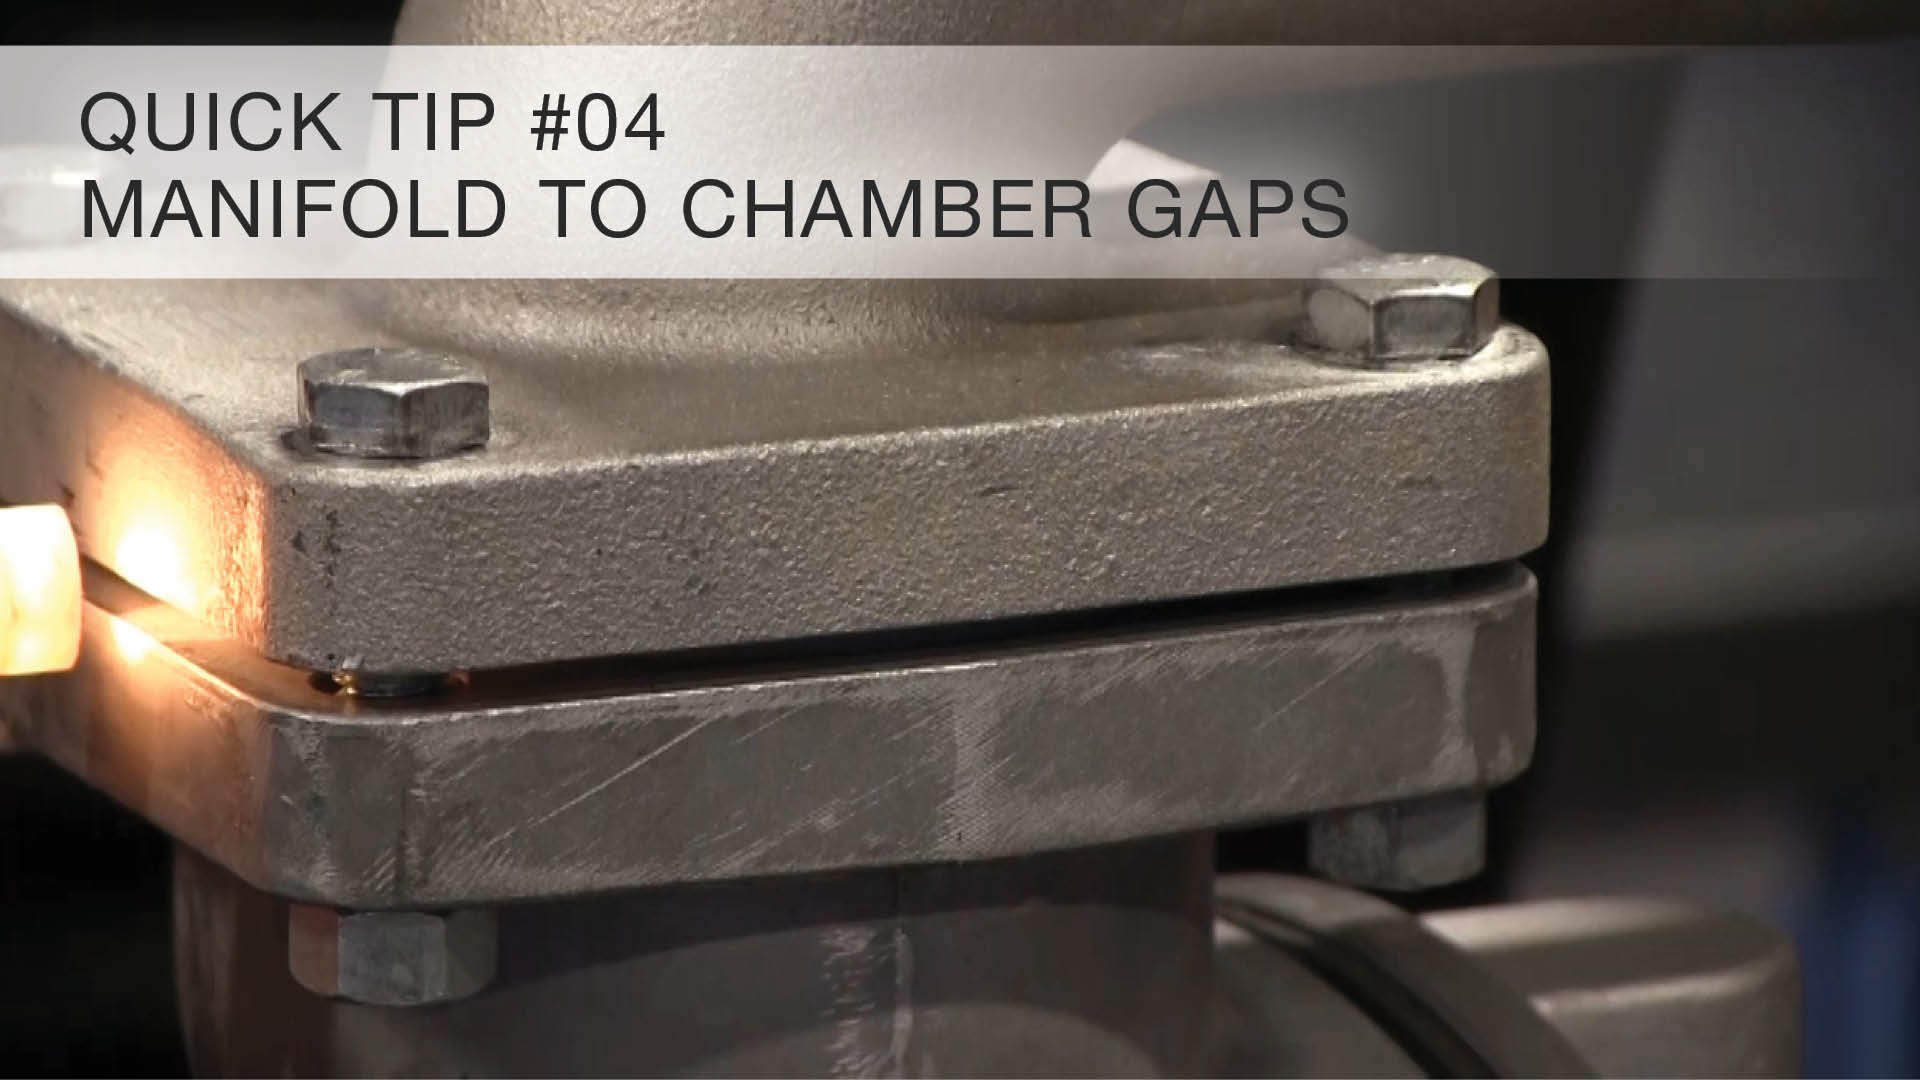 Quick Tip #04 - Manifold to Chamber Gaps